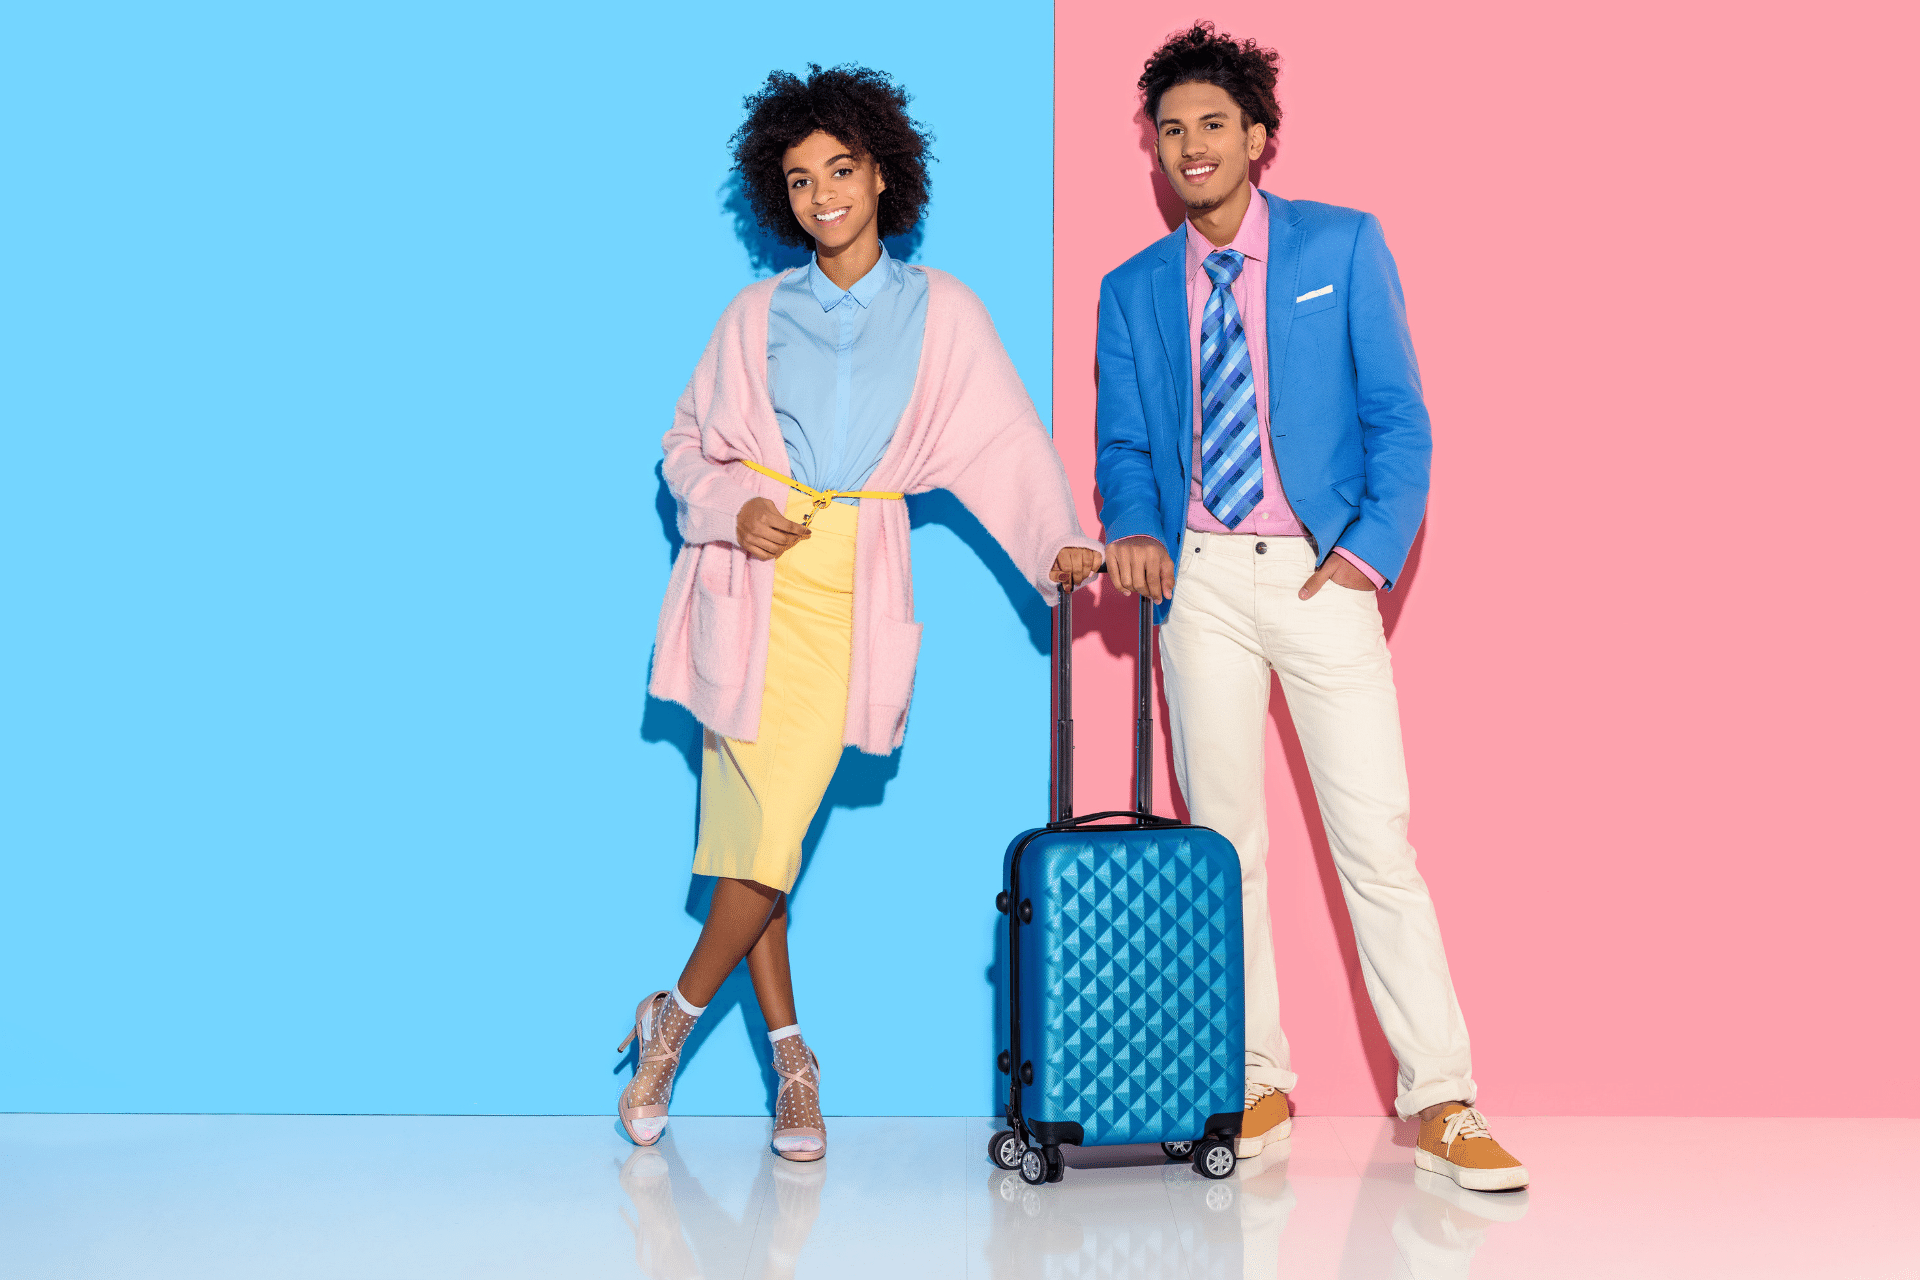 Image of a happy man and woman standing together holding a suitcase handle